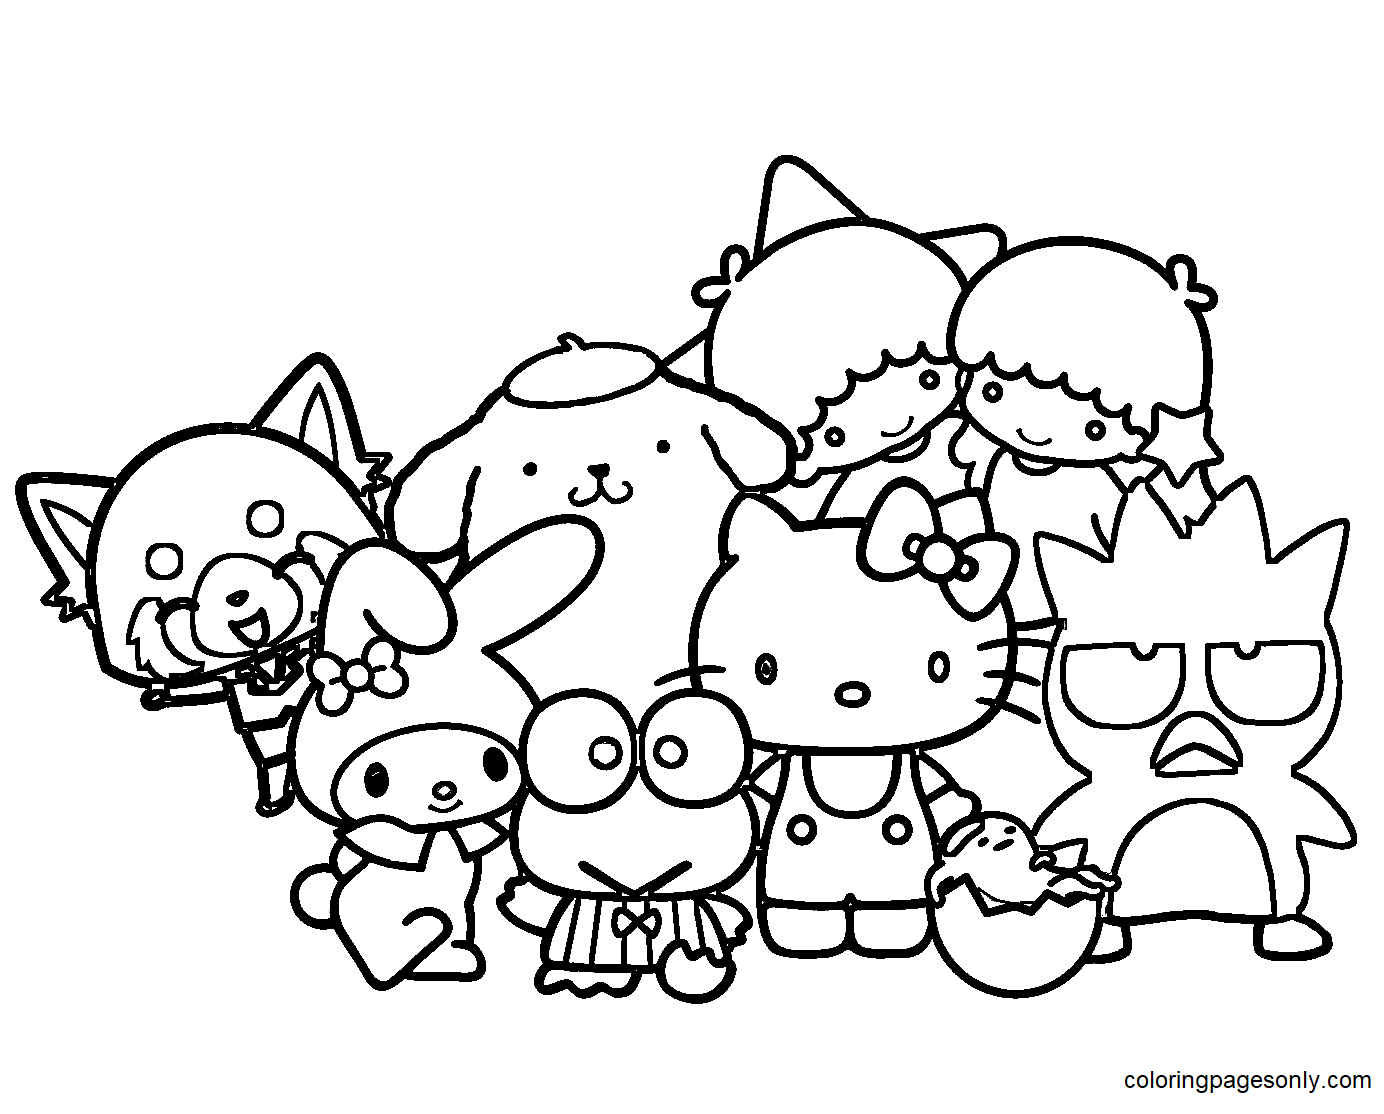 Sanrio Characters Coloring Pages Coloring Pages